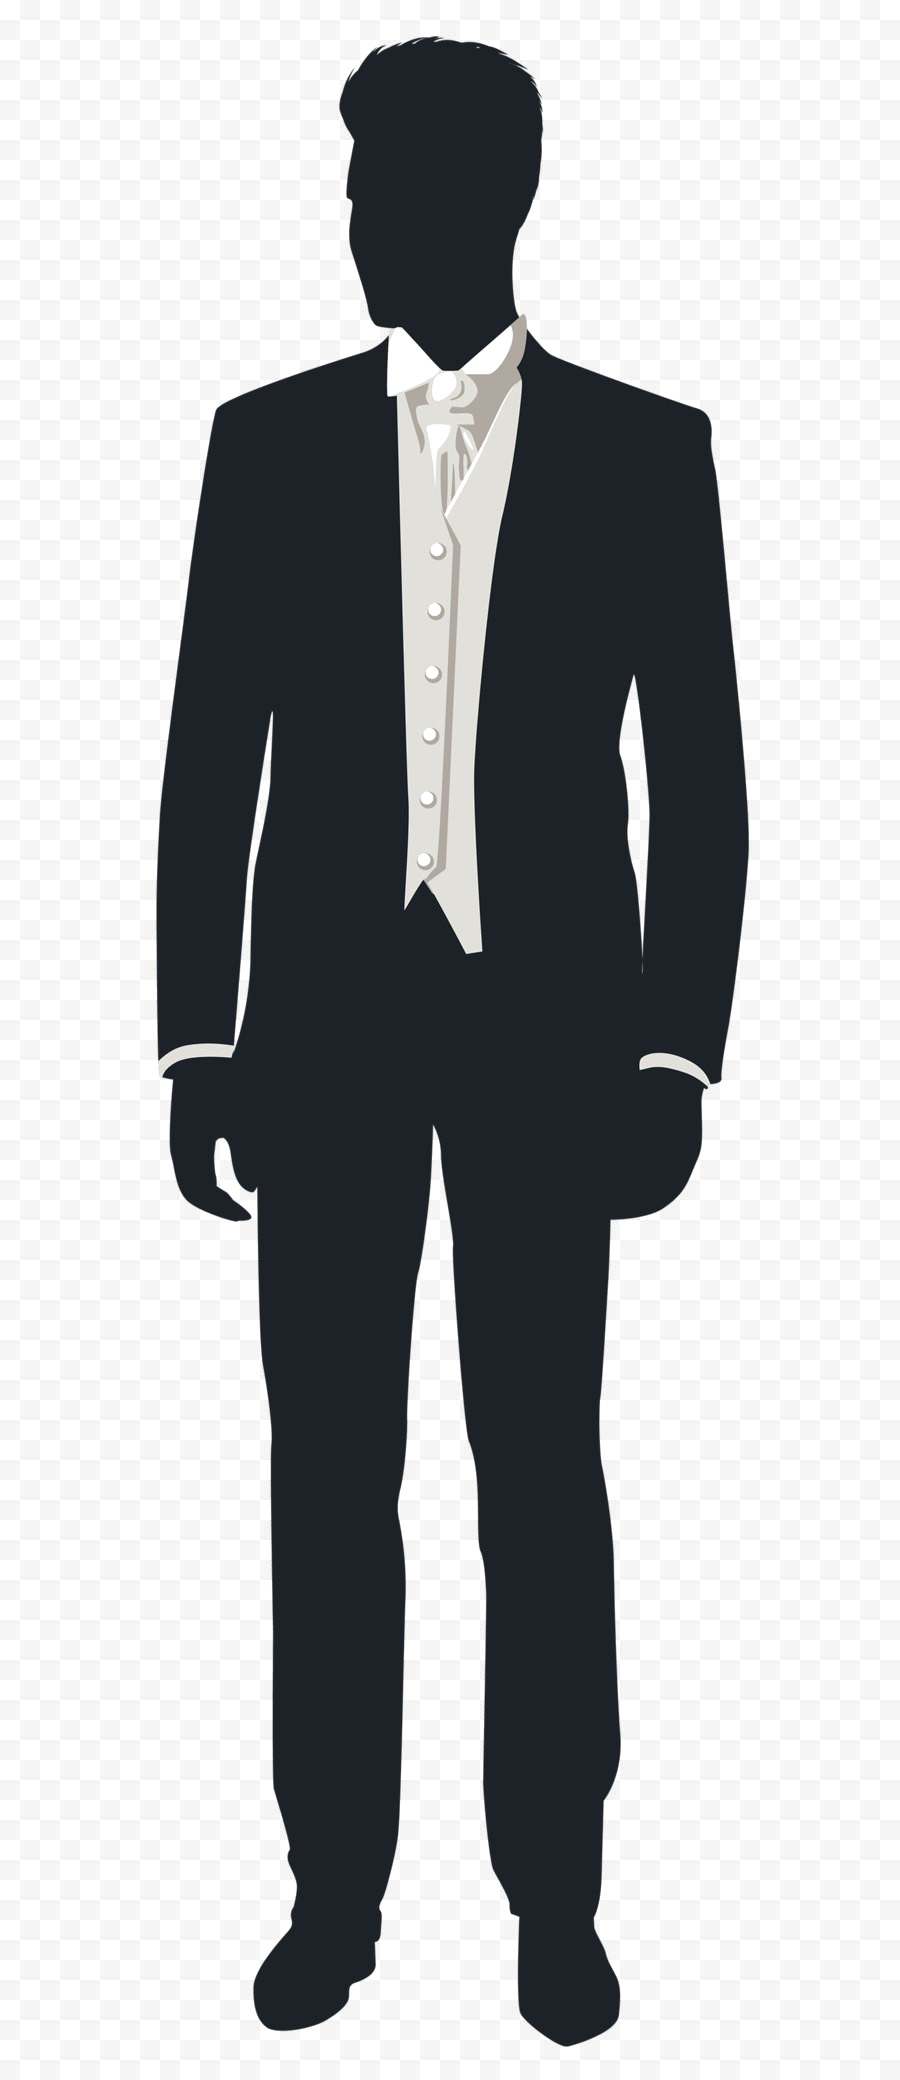 Groom Free Photo PNG PNG Image